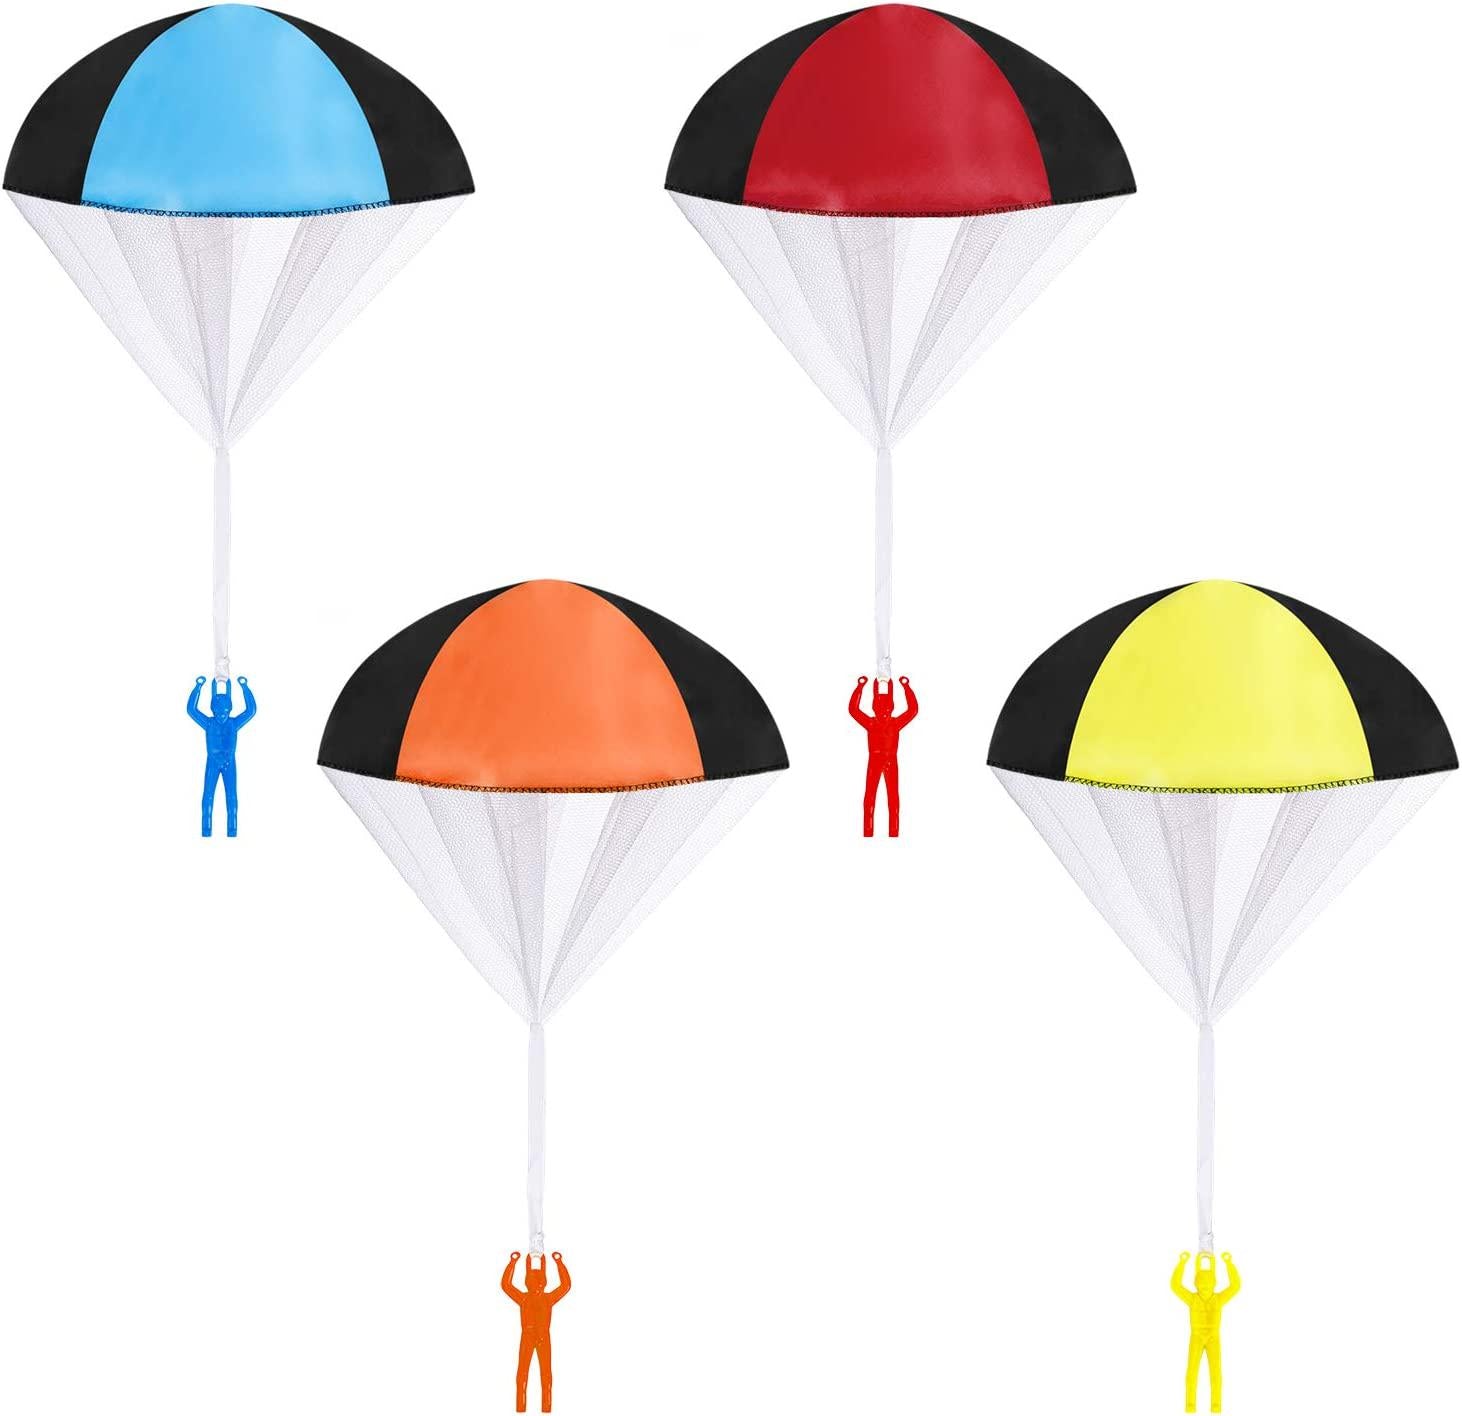 MengH-SHOP, MengH-SHOP Parachute Toy Hand Throw Parachute Man Soldier Toy Set Outdoor Throwing Flying Toys Gifts for Kids Child Boys Girls 4 Pack